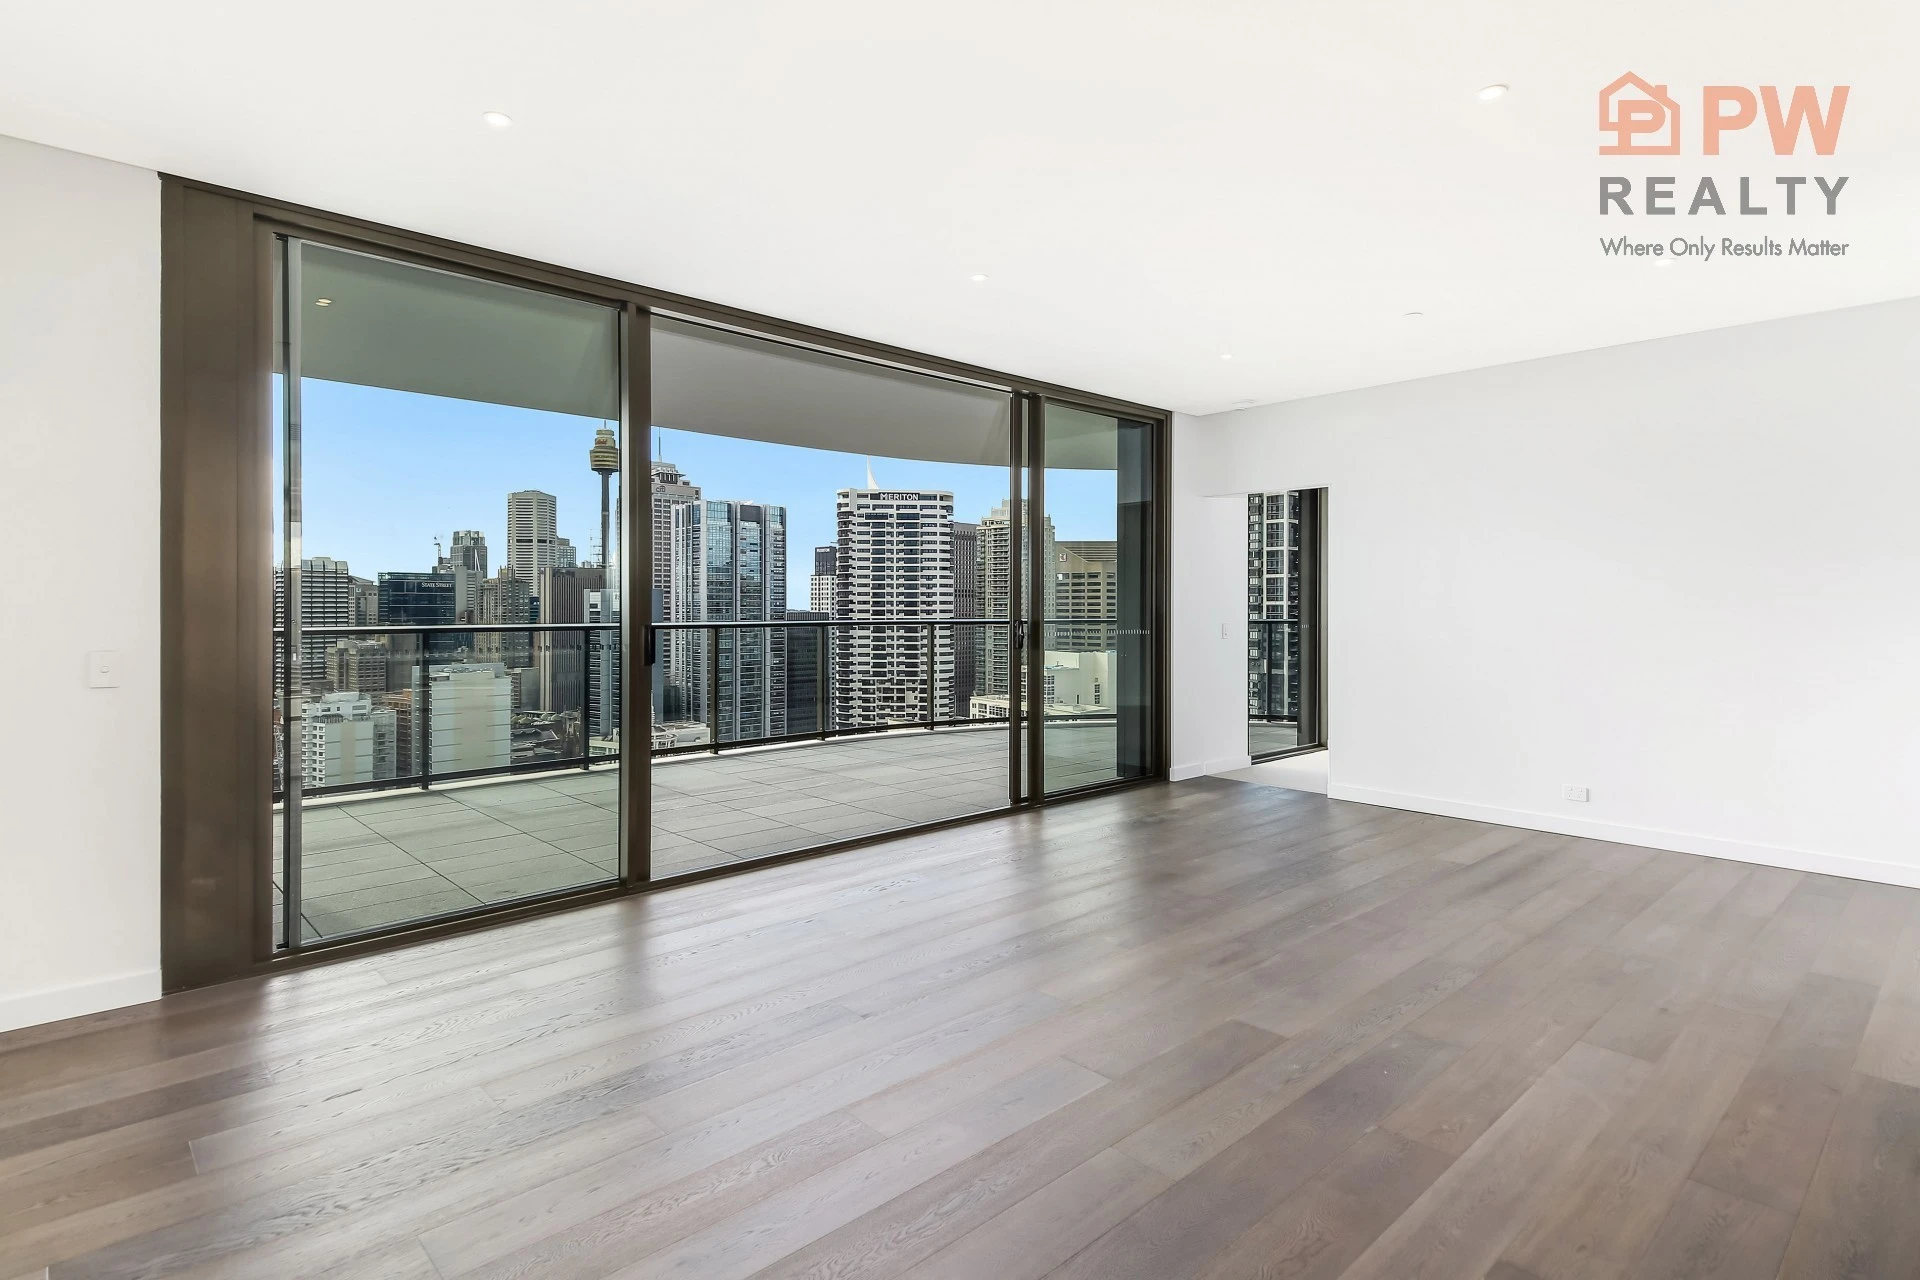 Exclusive Luxurious Living Lifestyle Overlooking Darling Harbour